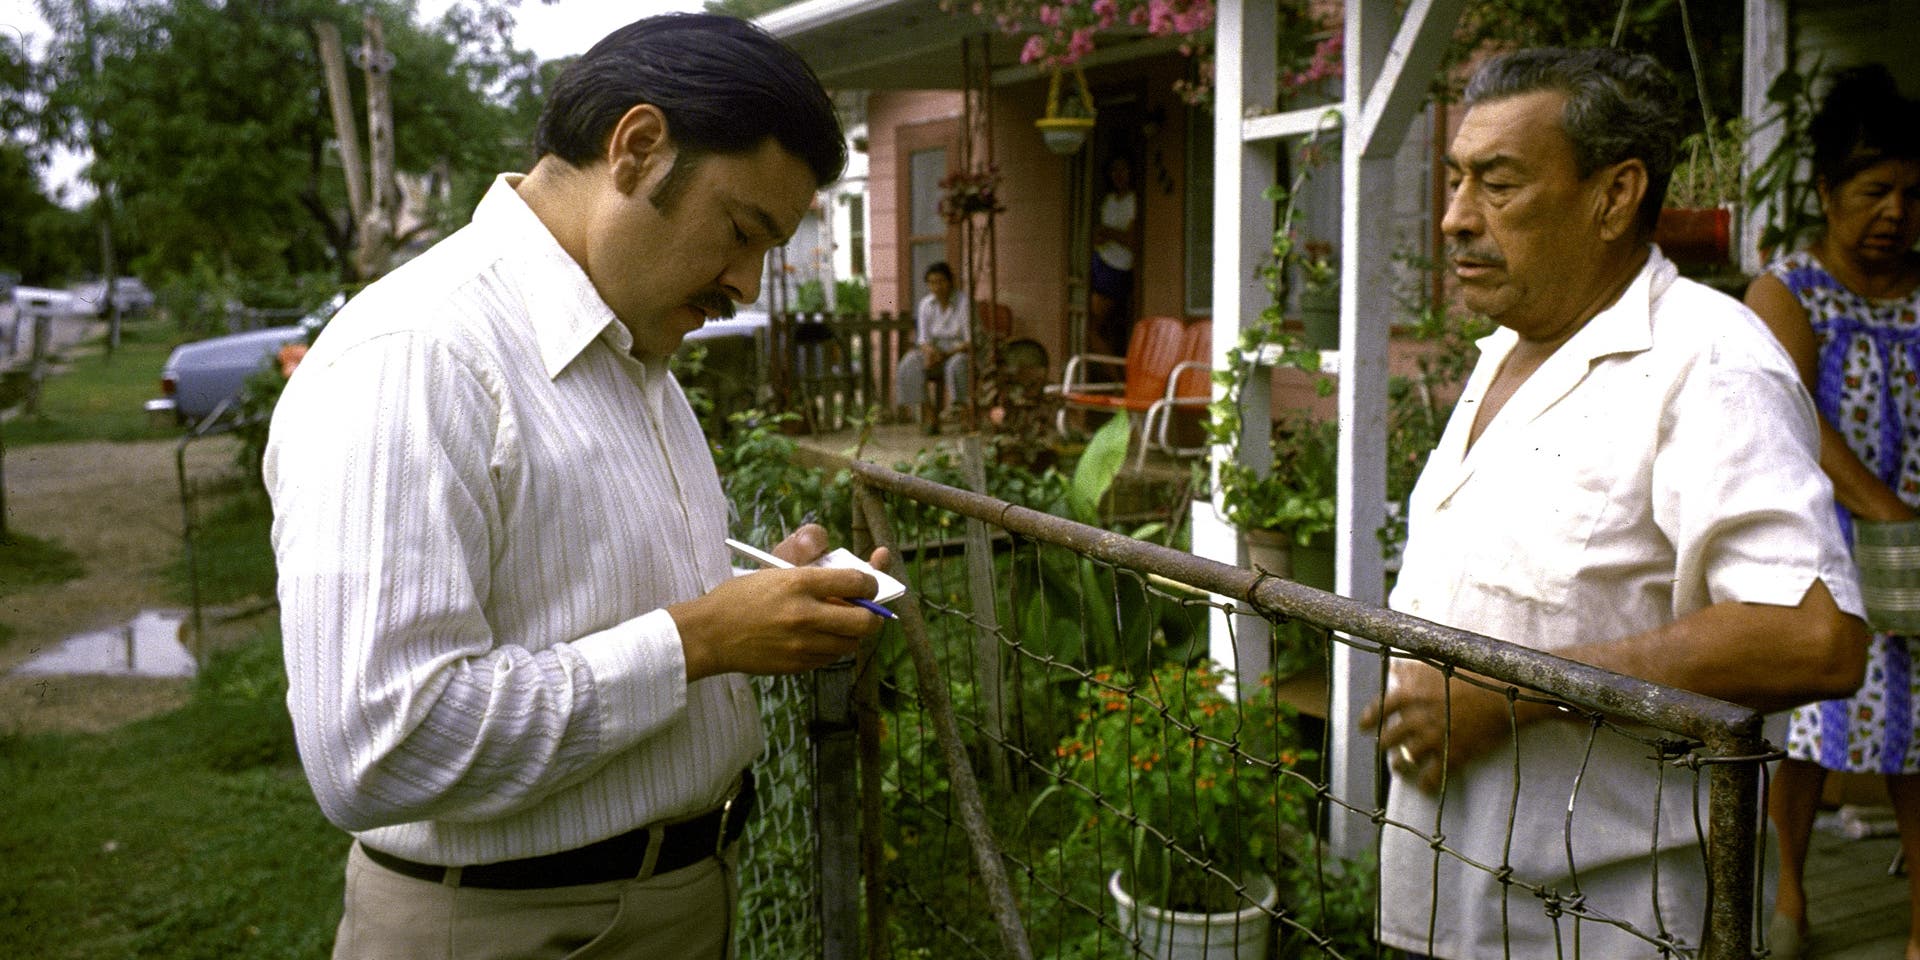 Willie Velásquez (left) speaking with a potential new voter (right)